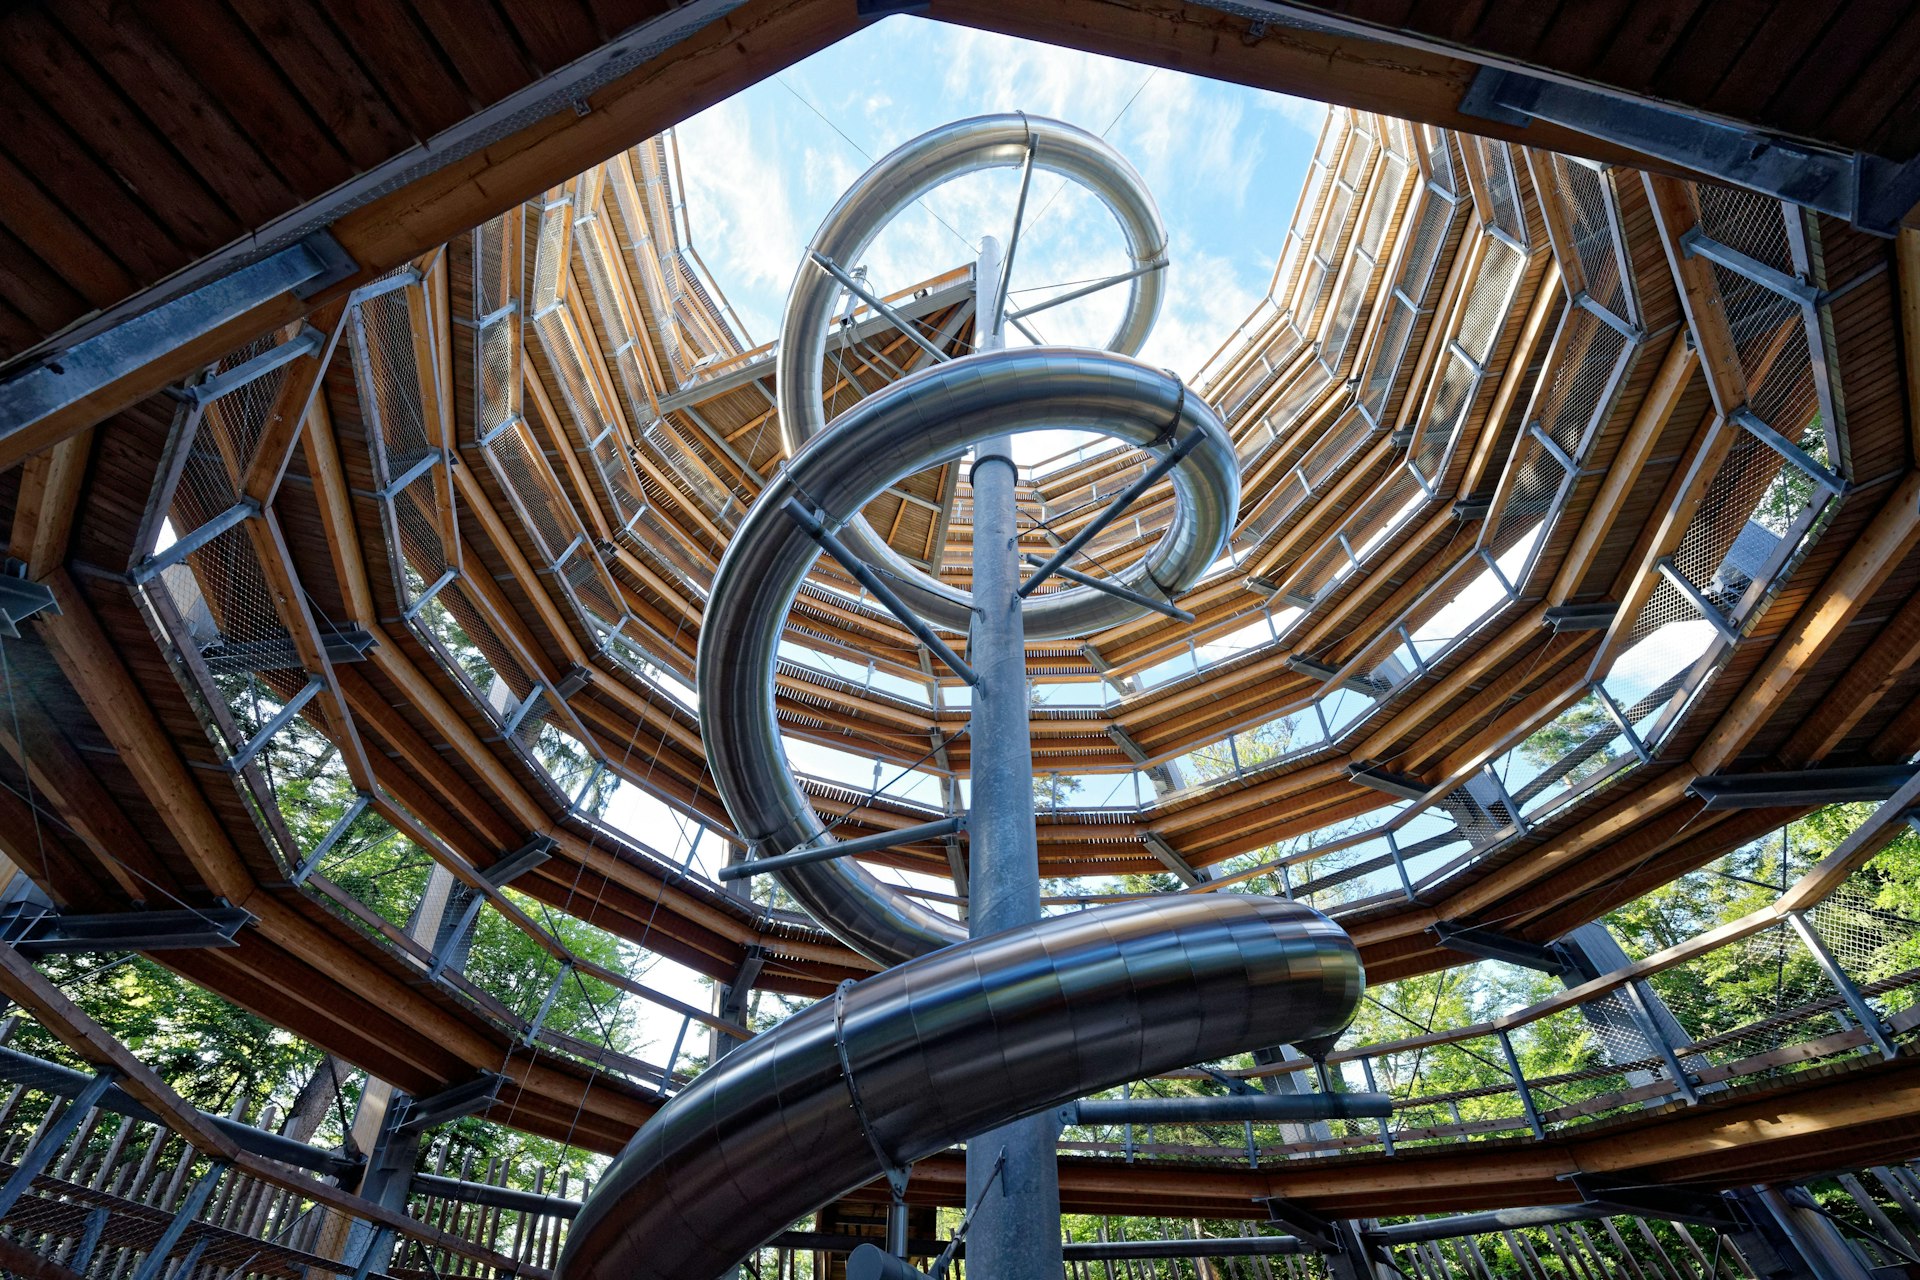 A shot up the inside of a spiral walkway winding upwards towards the tree canopy